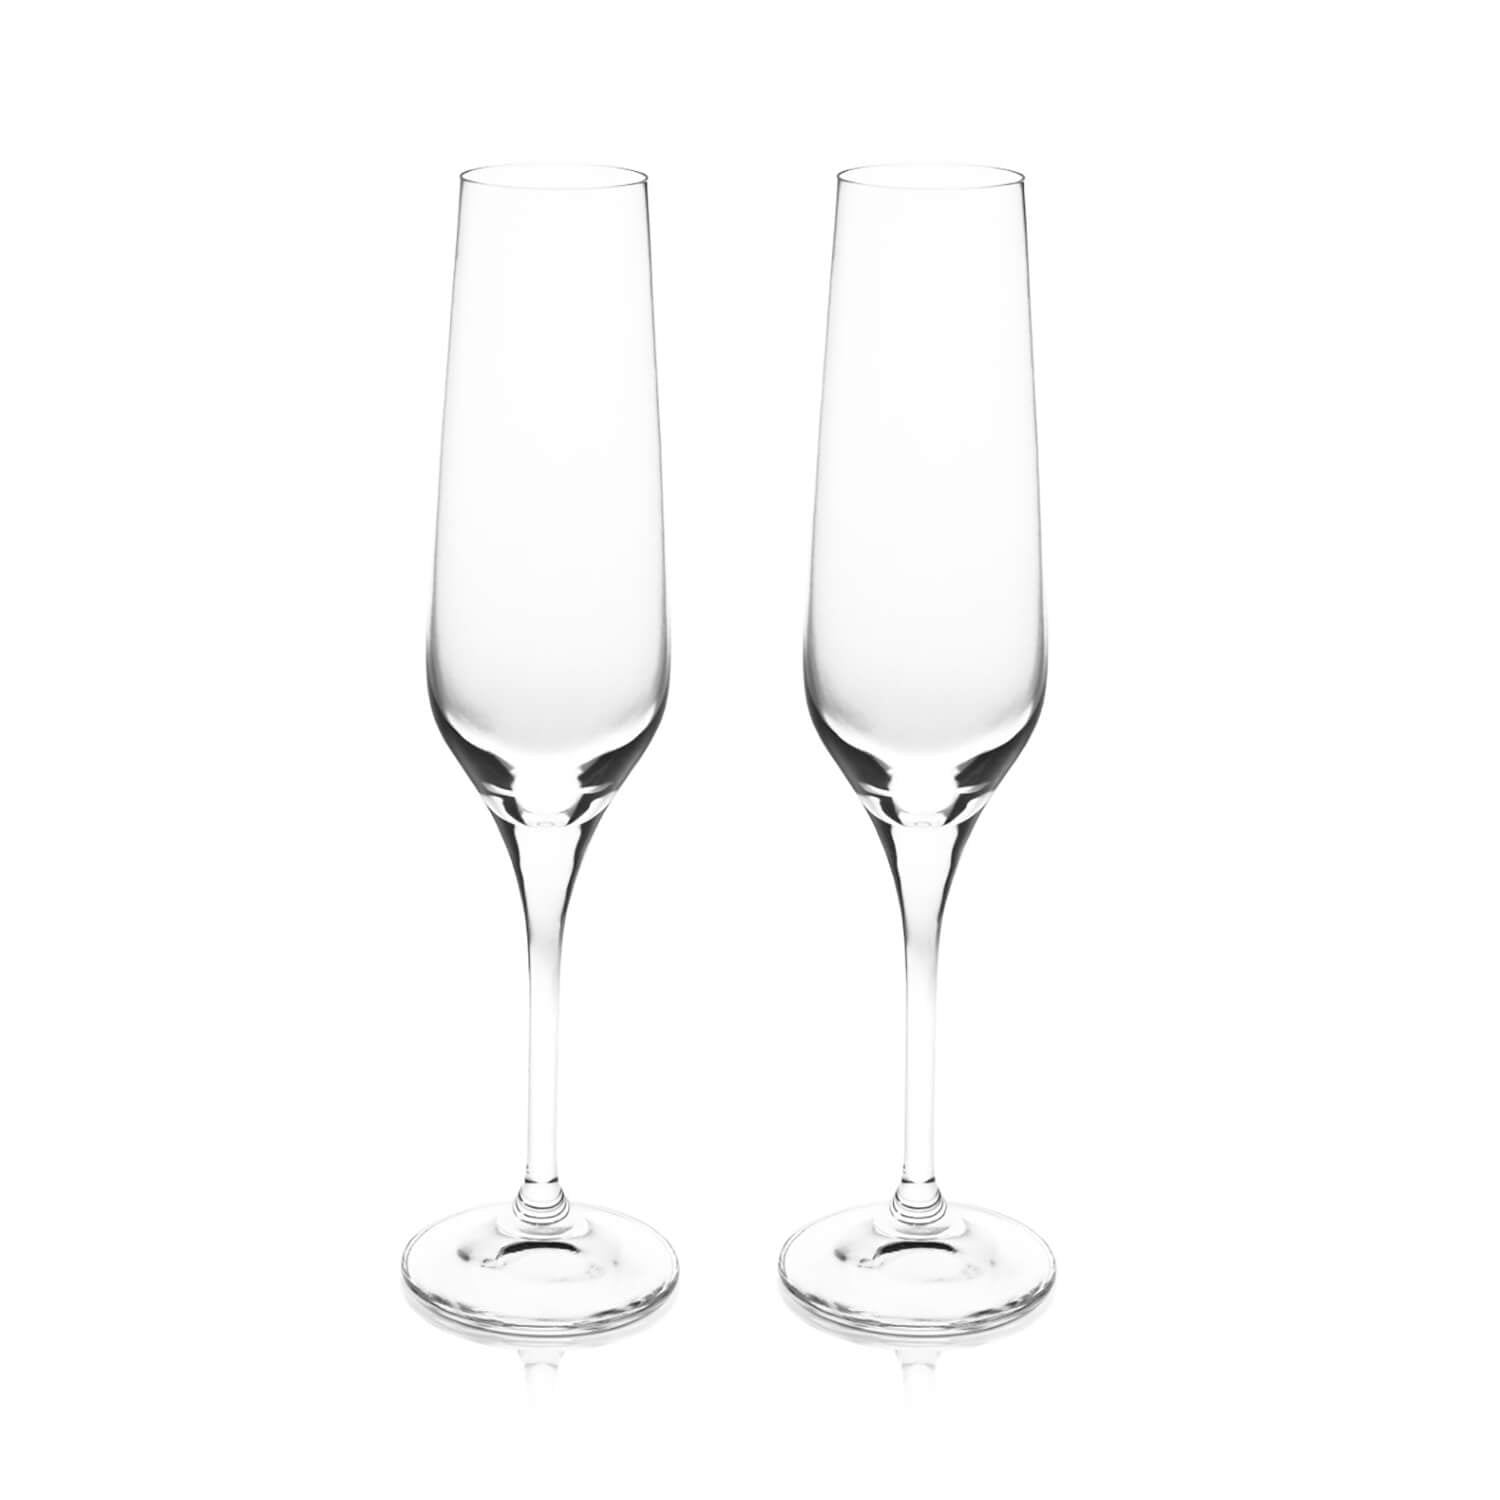 Tipperary Crystal Eternity Crystal Champagne Glasses Pair 1 Shaws Department Stores